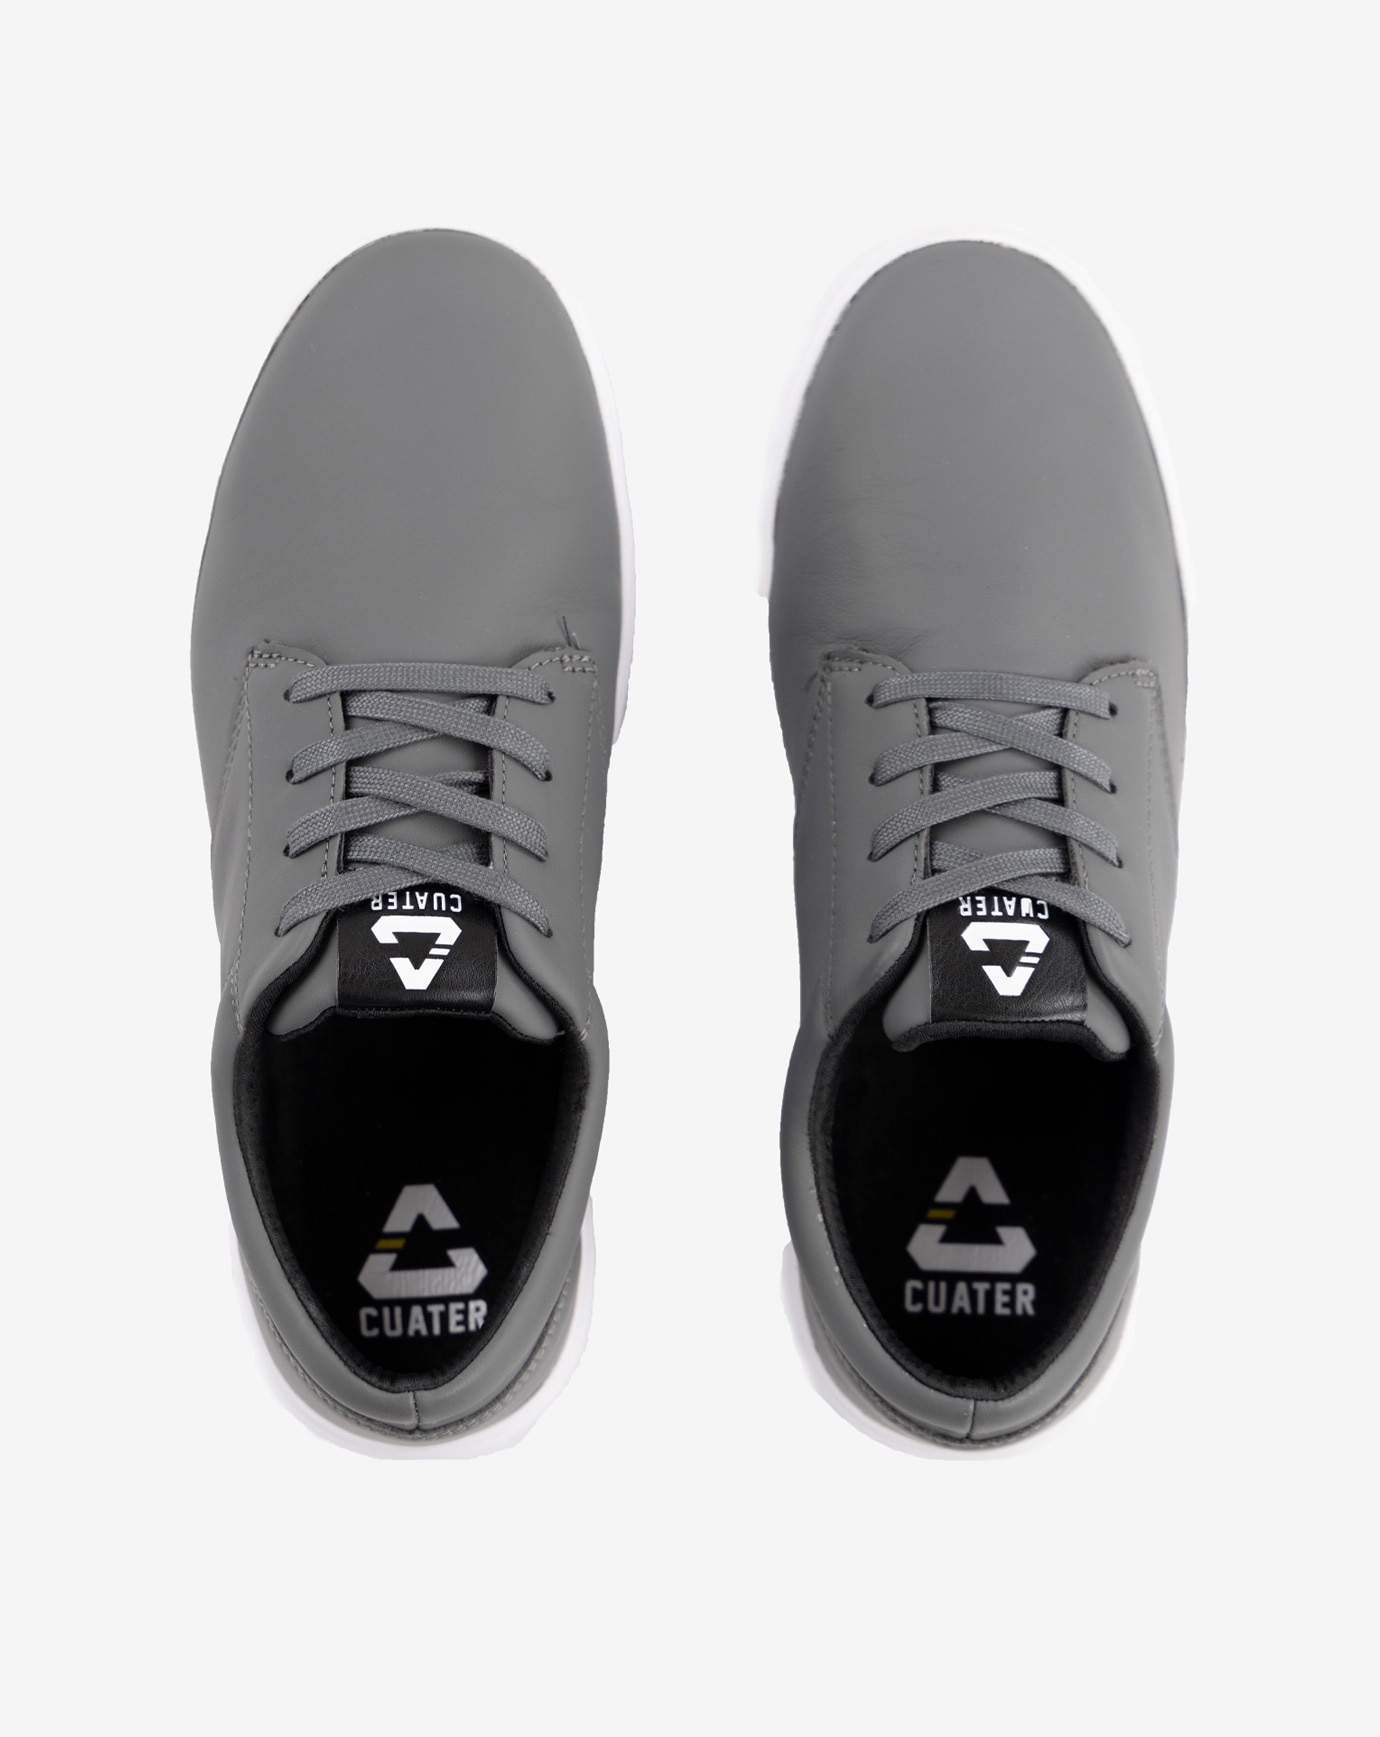 THE WILDCARD LEATHER SPIKELESS GOLF SHOE Image Thumbnail 4